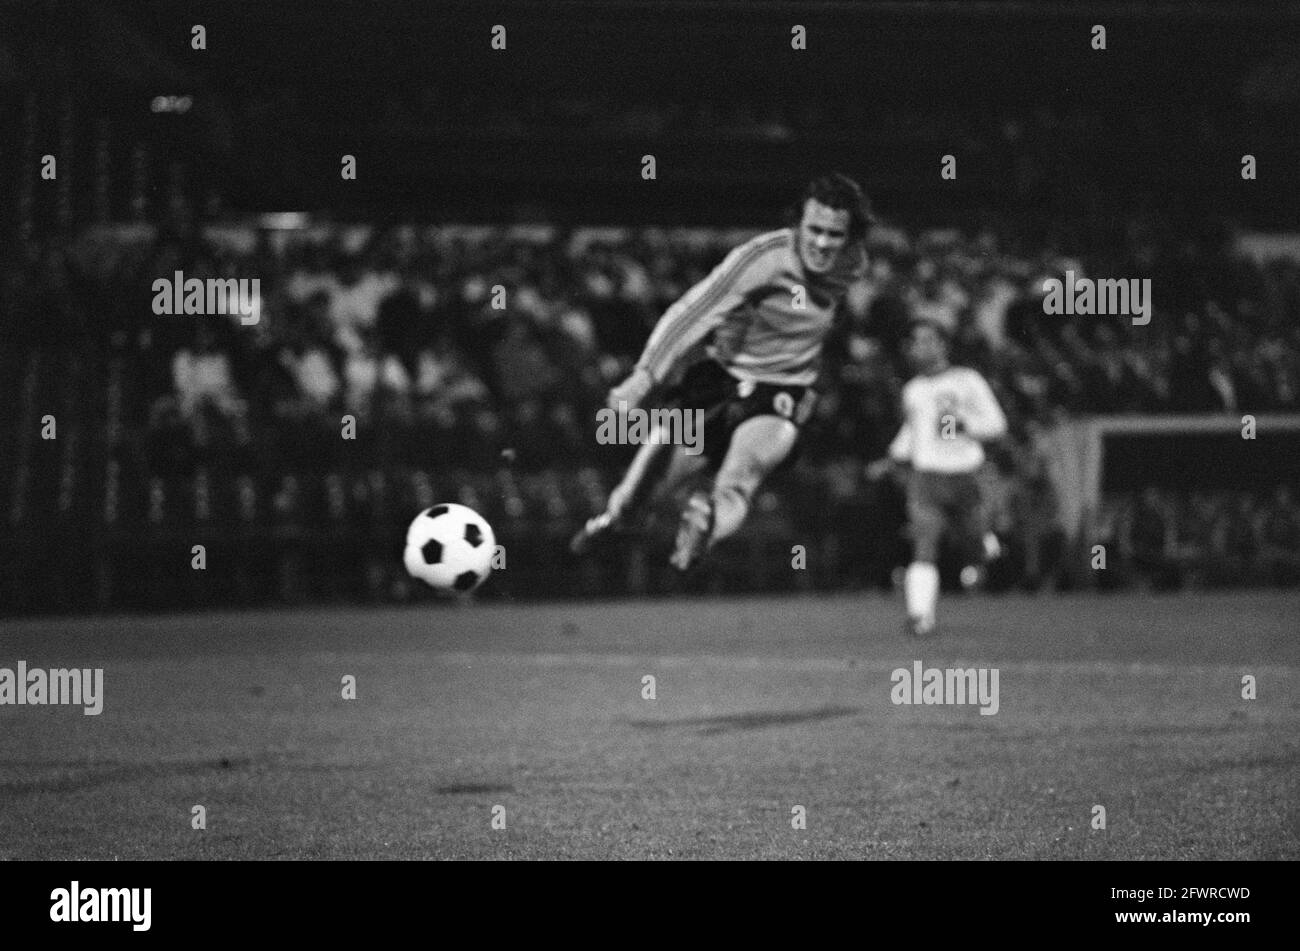 Netherlands against Switzerland 1-0, game moments, October 9, 1974, sports, soccer, The Netherlands, 20th century press agency photo, news to remember, documentary, historic photography 1945-1990, visual stories, human history of the Twentieth Century, capturing moments in time Stock Photo